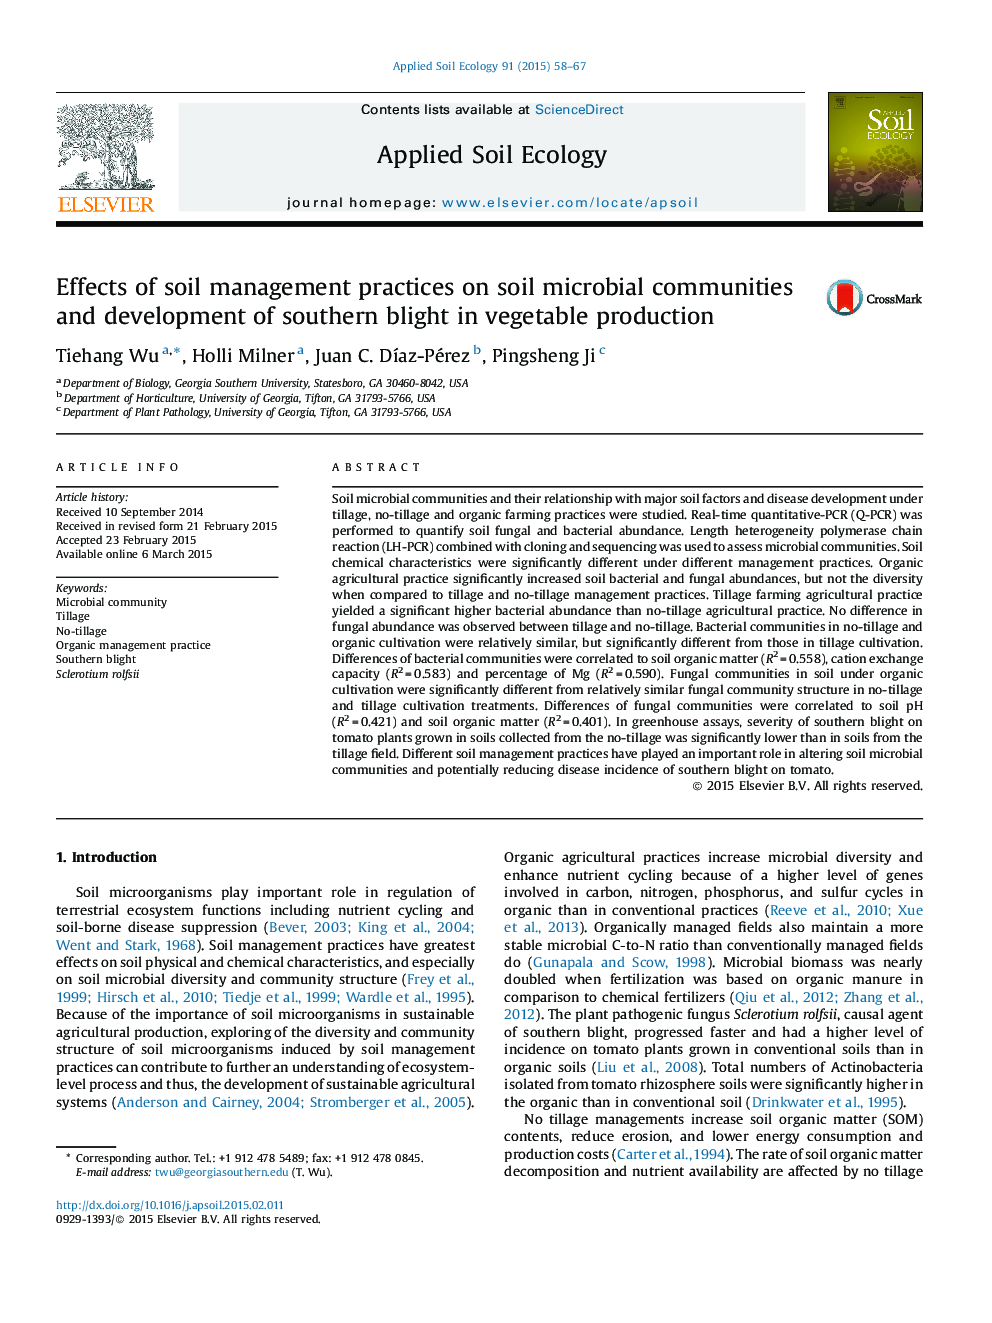 Effects of soil management practices on soil microbial communities and development of southern blight in vegetable production